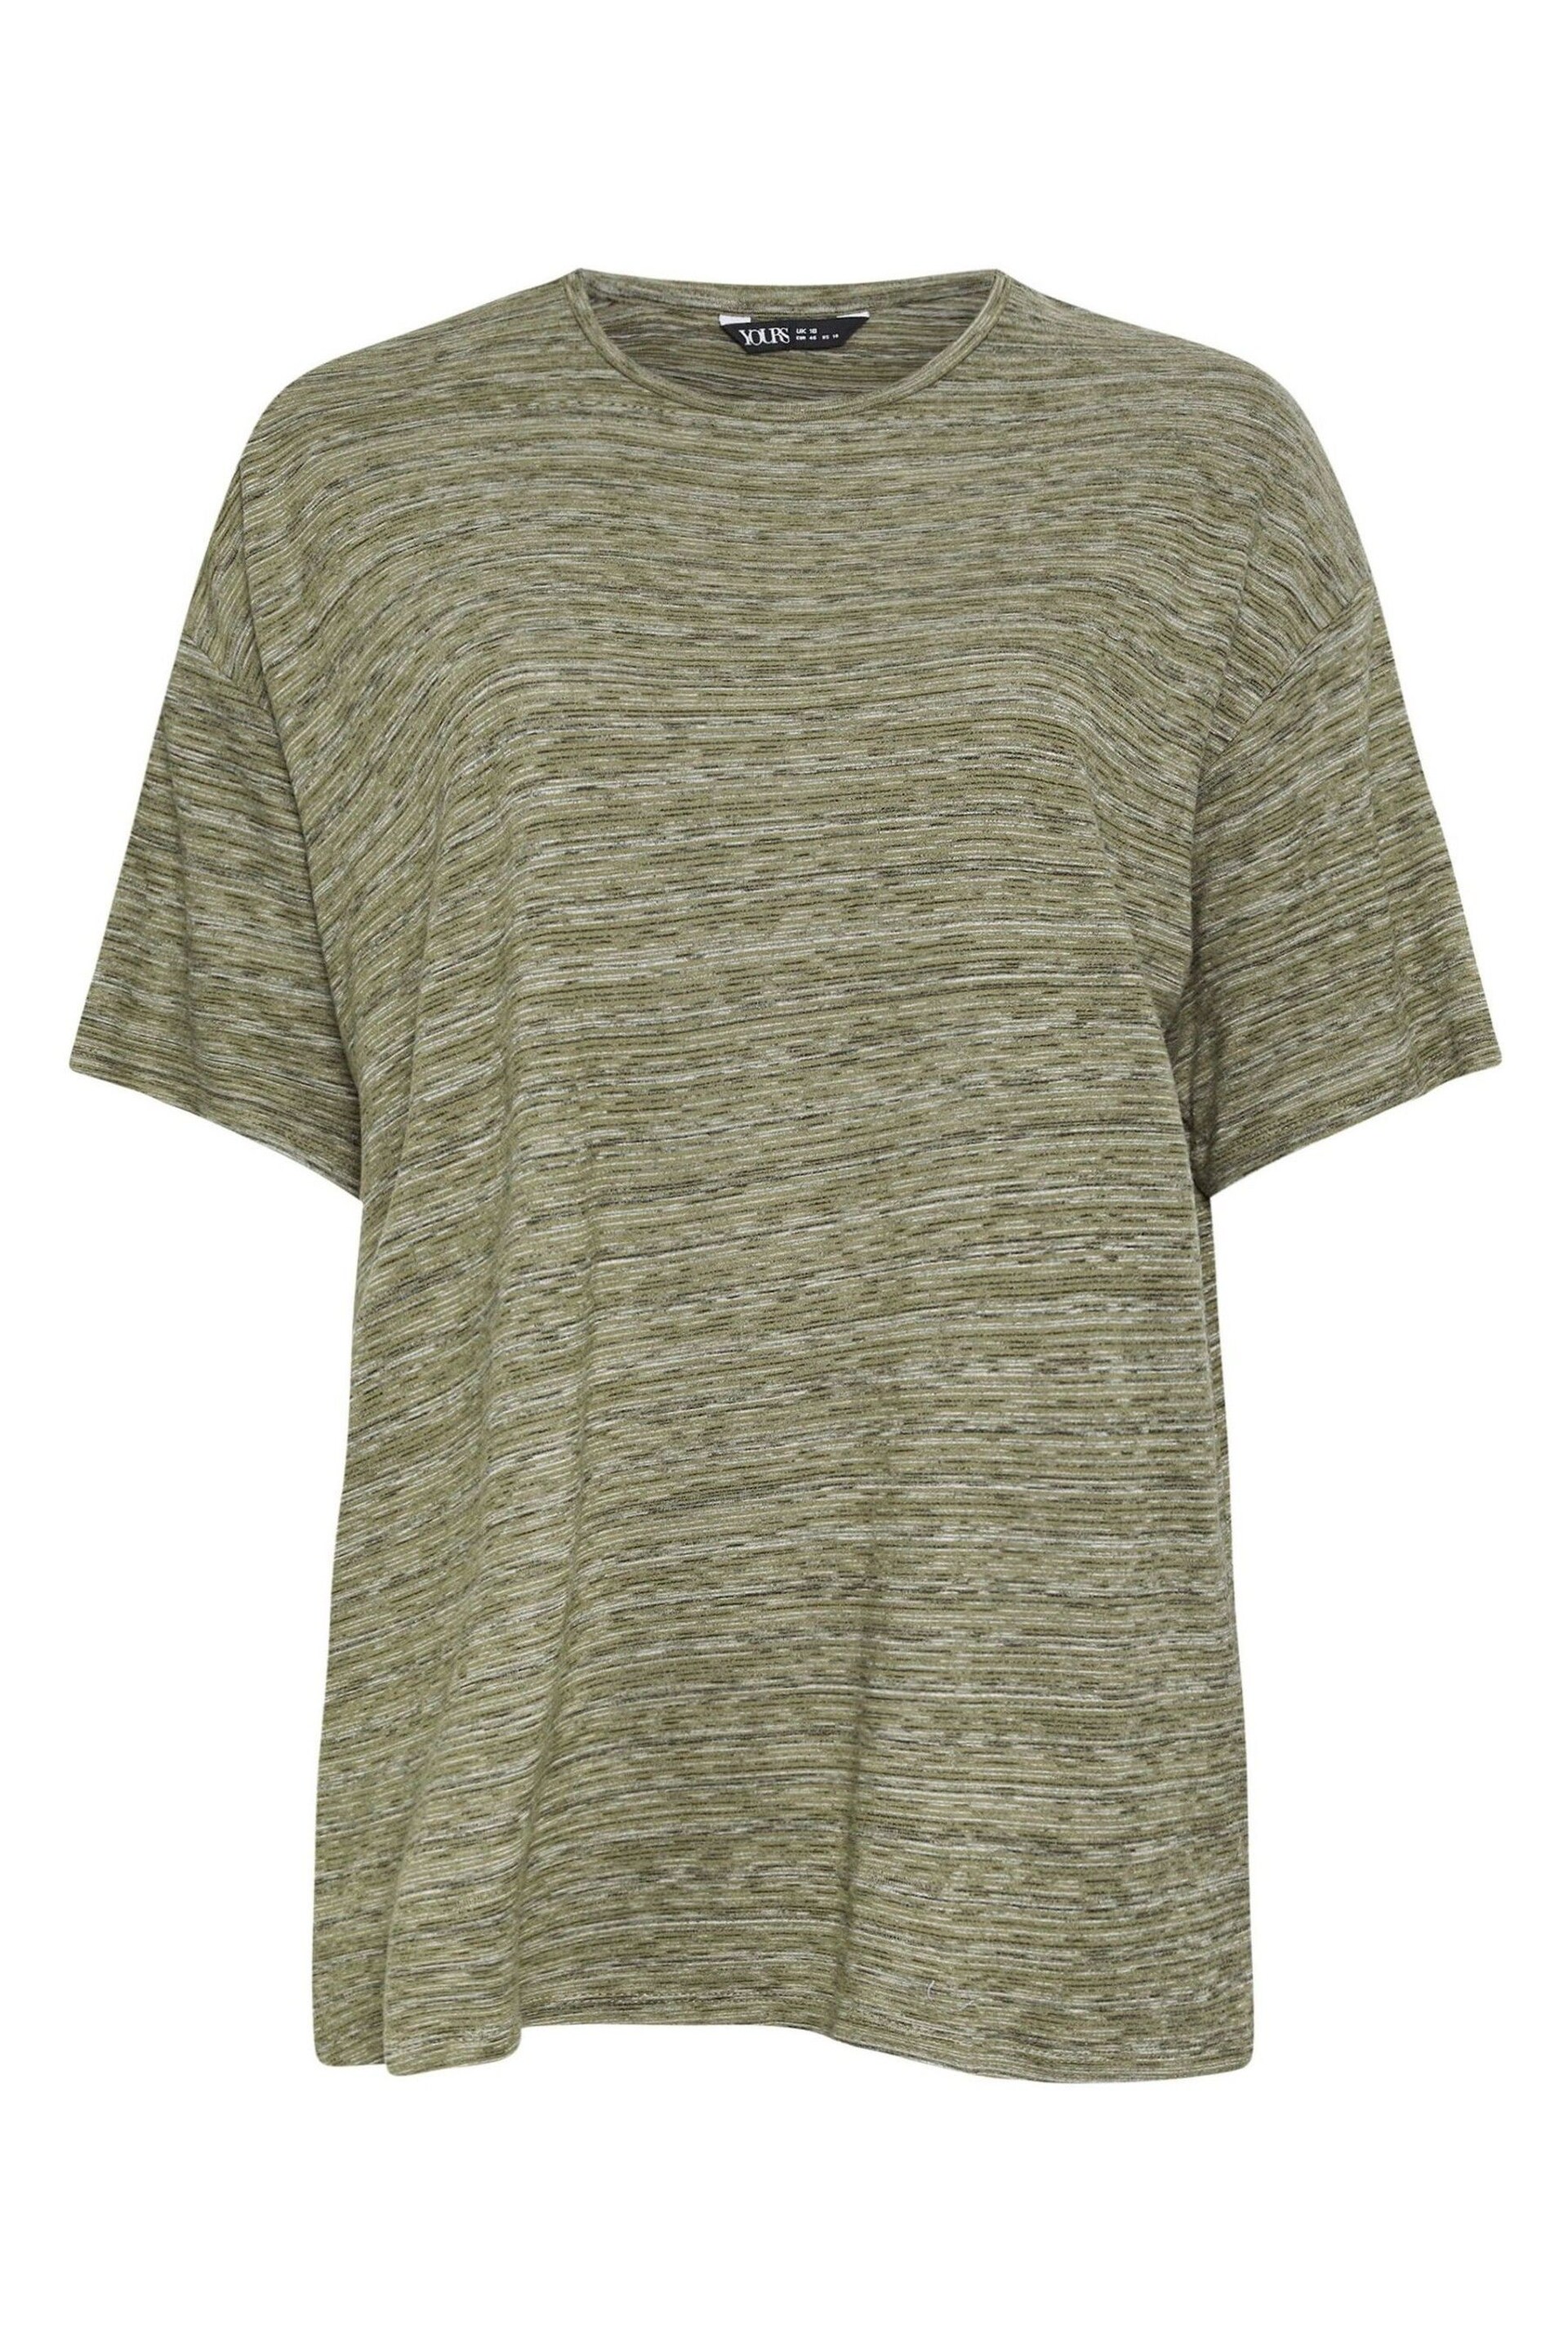 Yours Curve Green Oversized Striped Top - Image 5 of 5